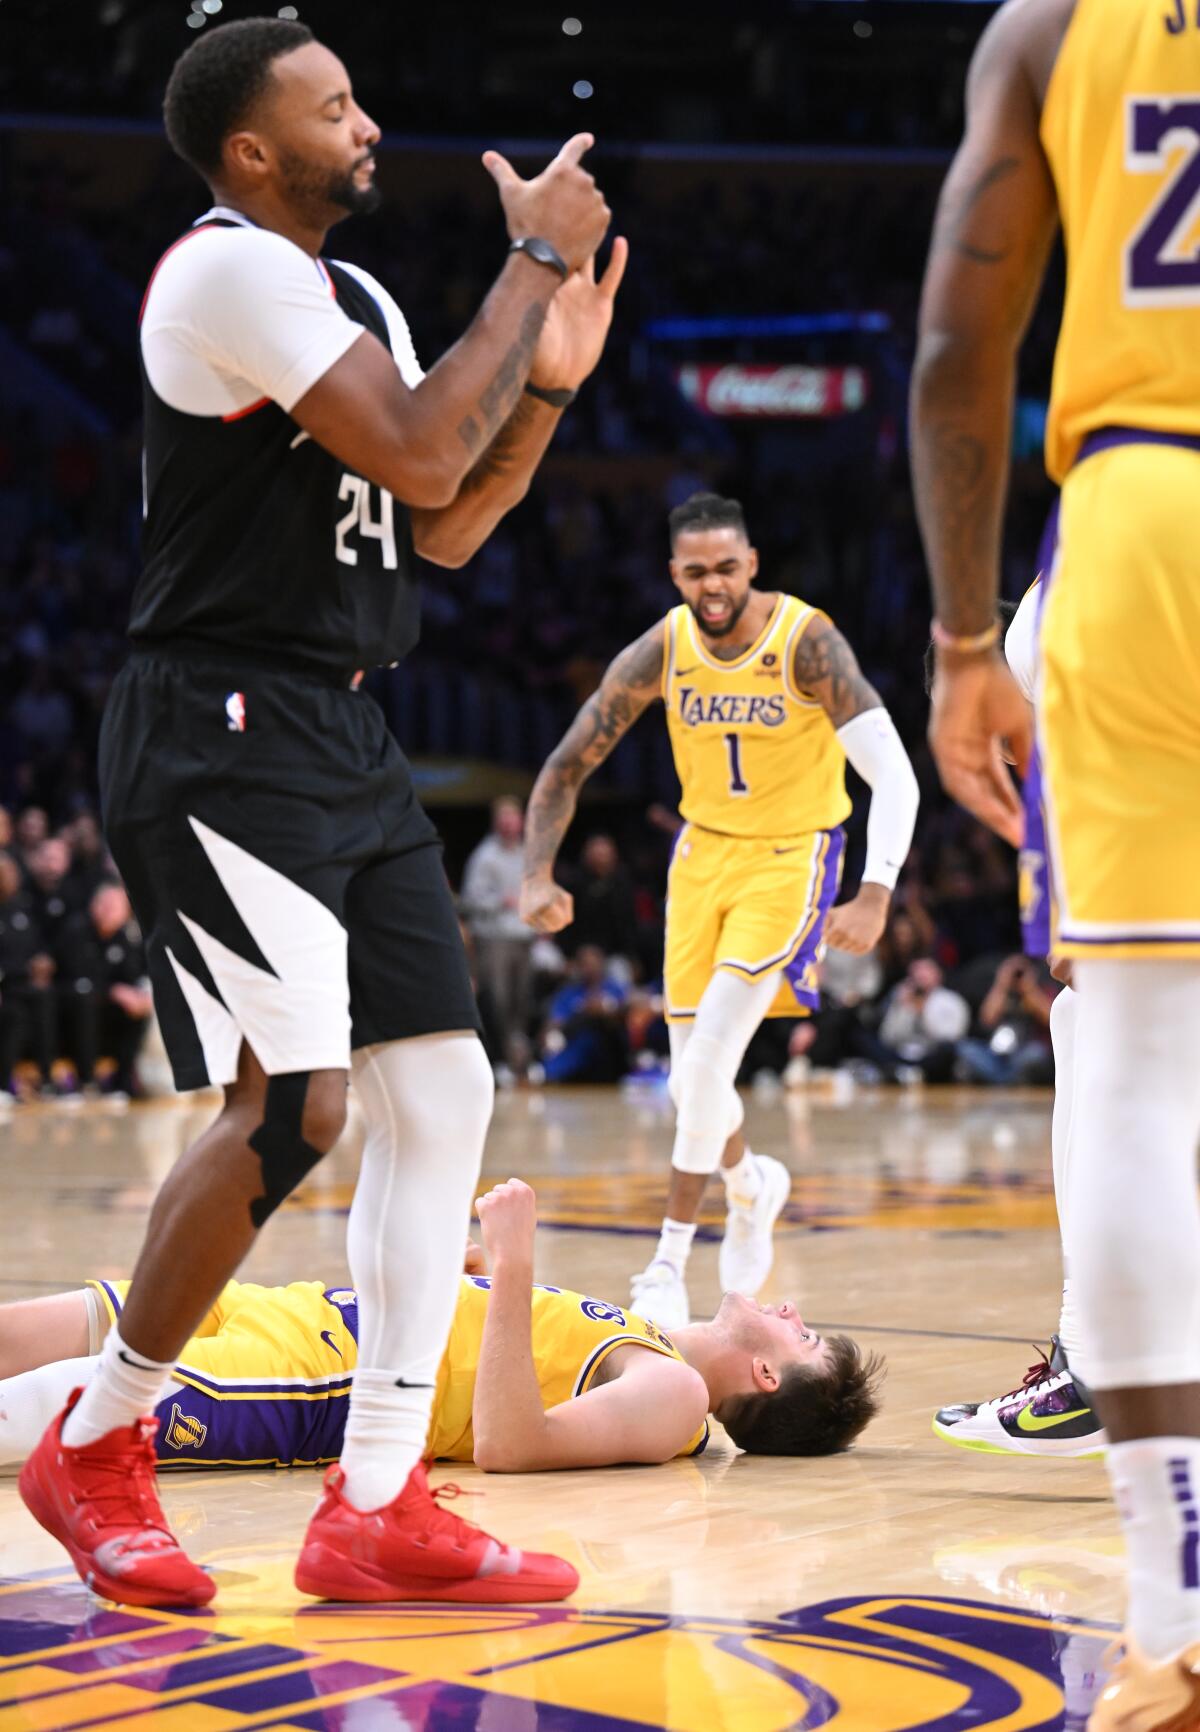 LeBron James' big night carries Lakers past Clippers in overtime